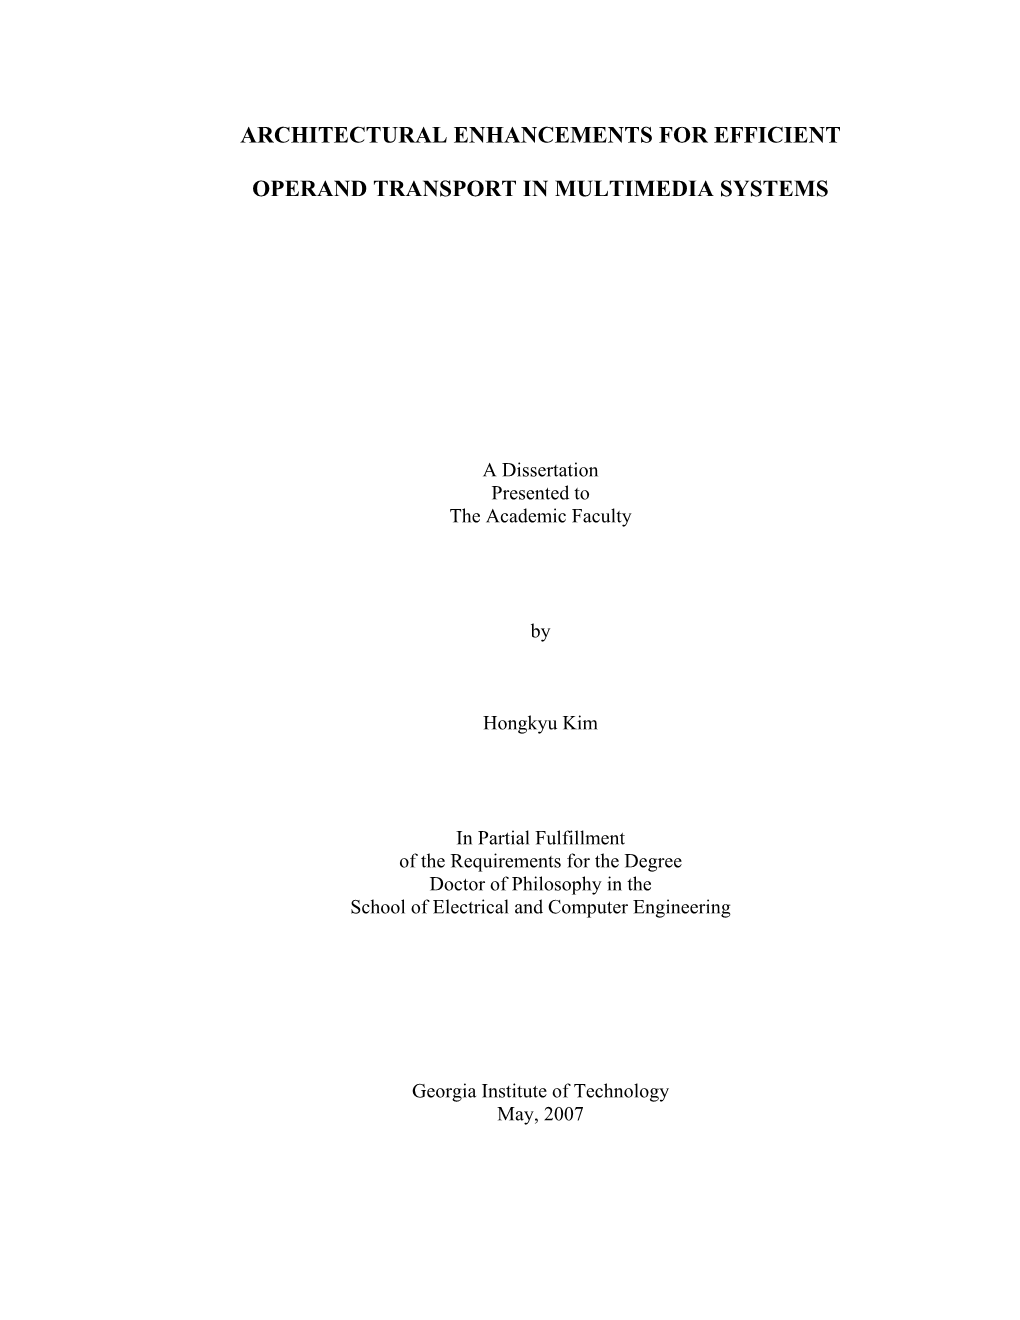 Architectural Enhancements for Efficient Operand Transport in Multimedia Systems